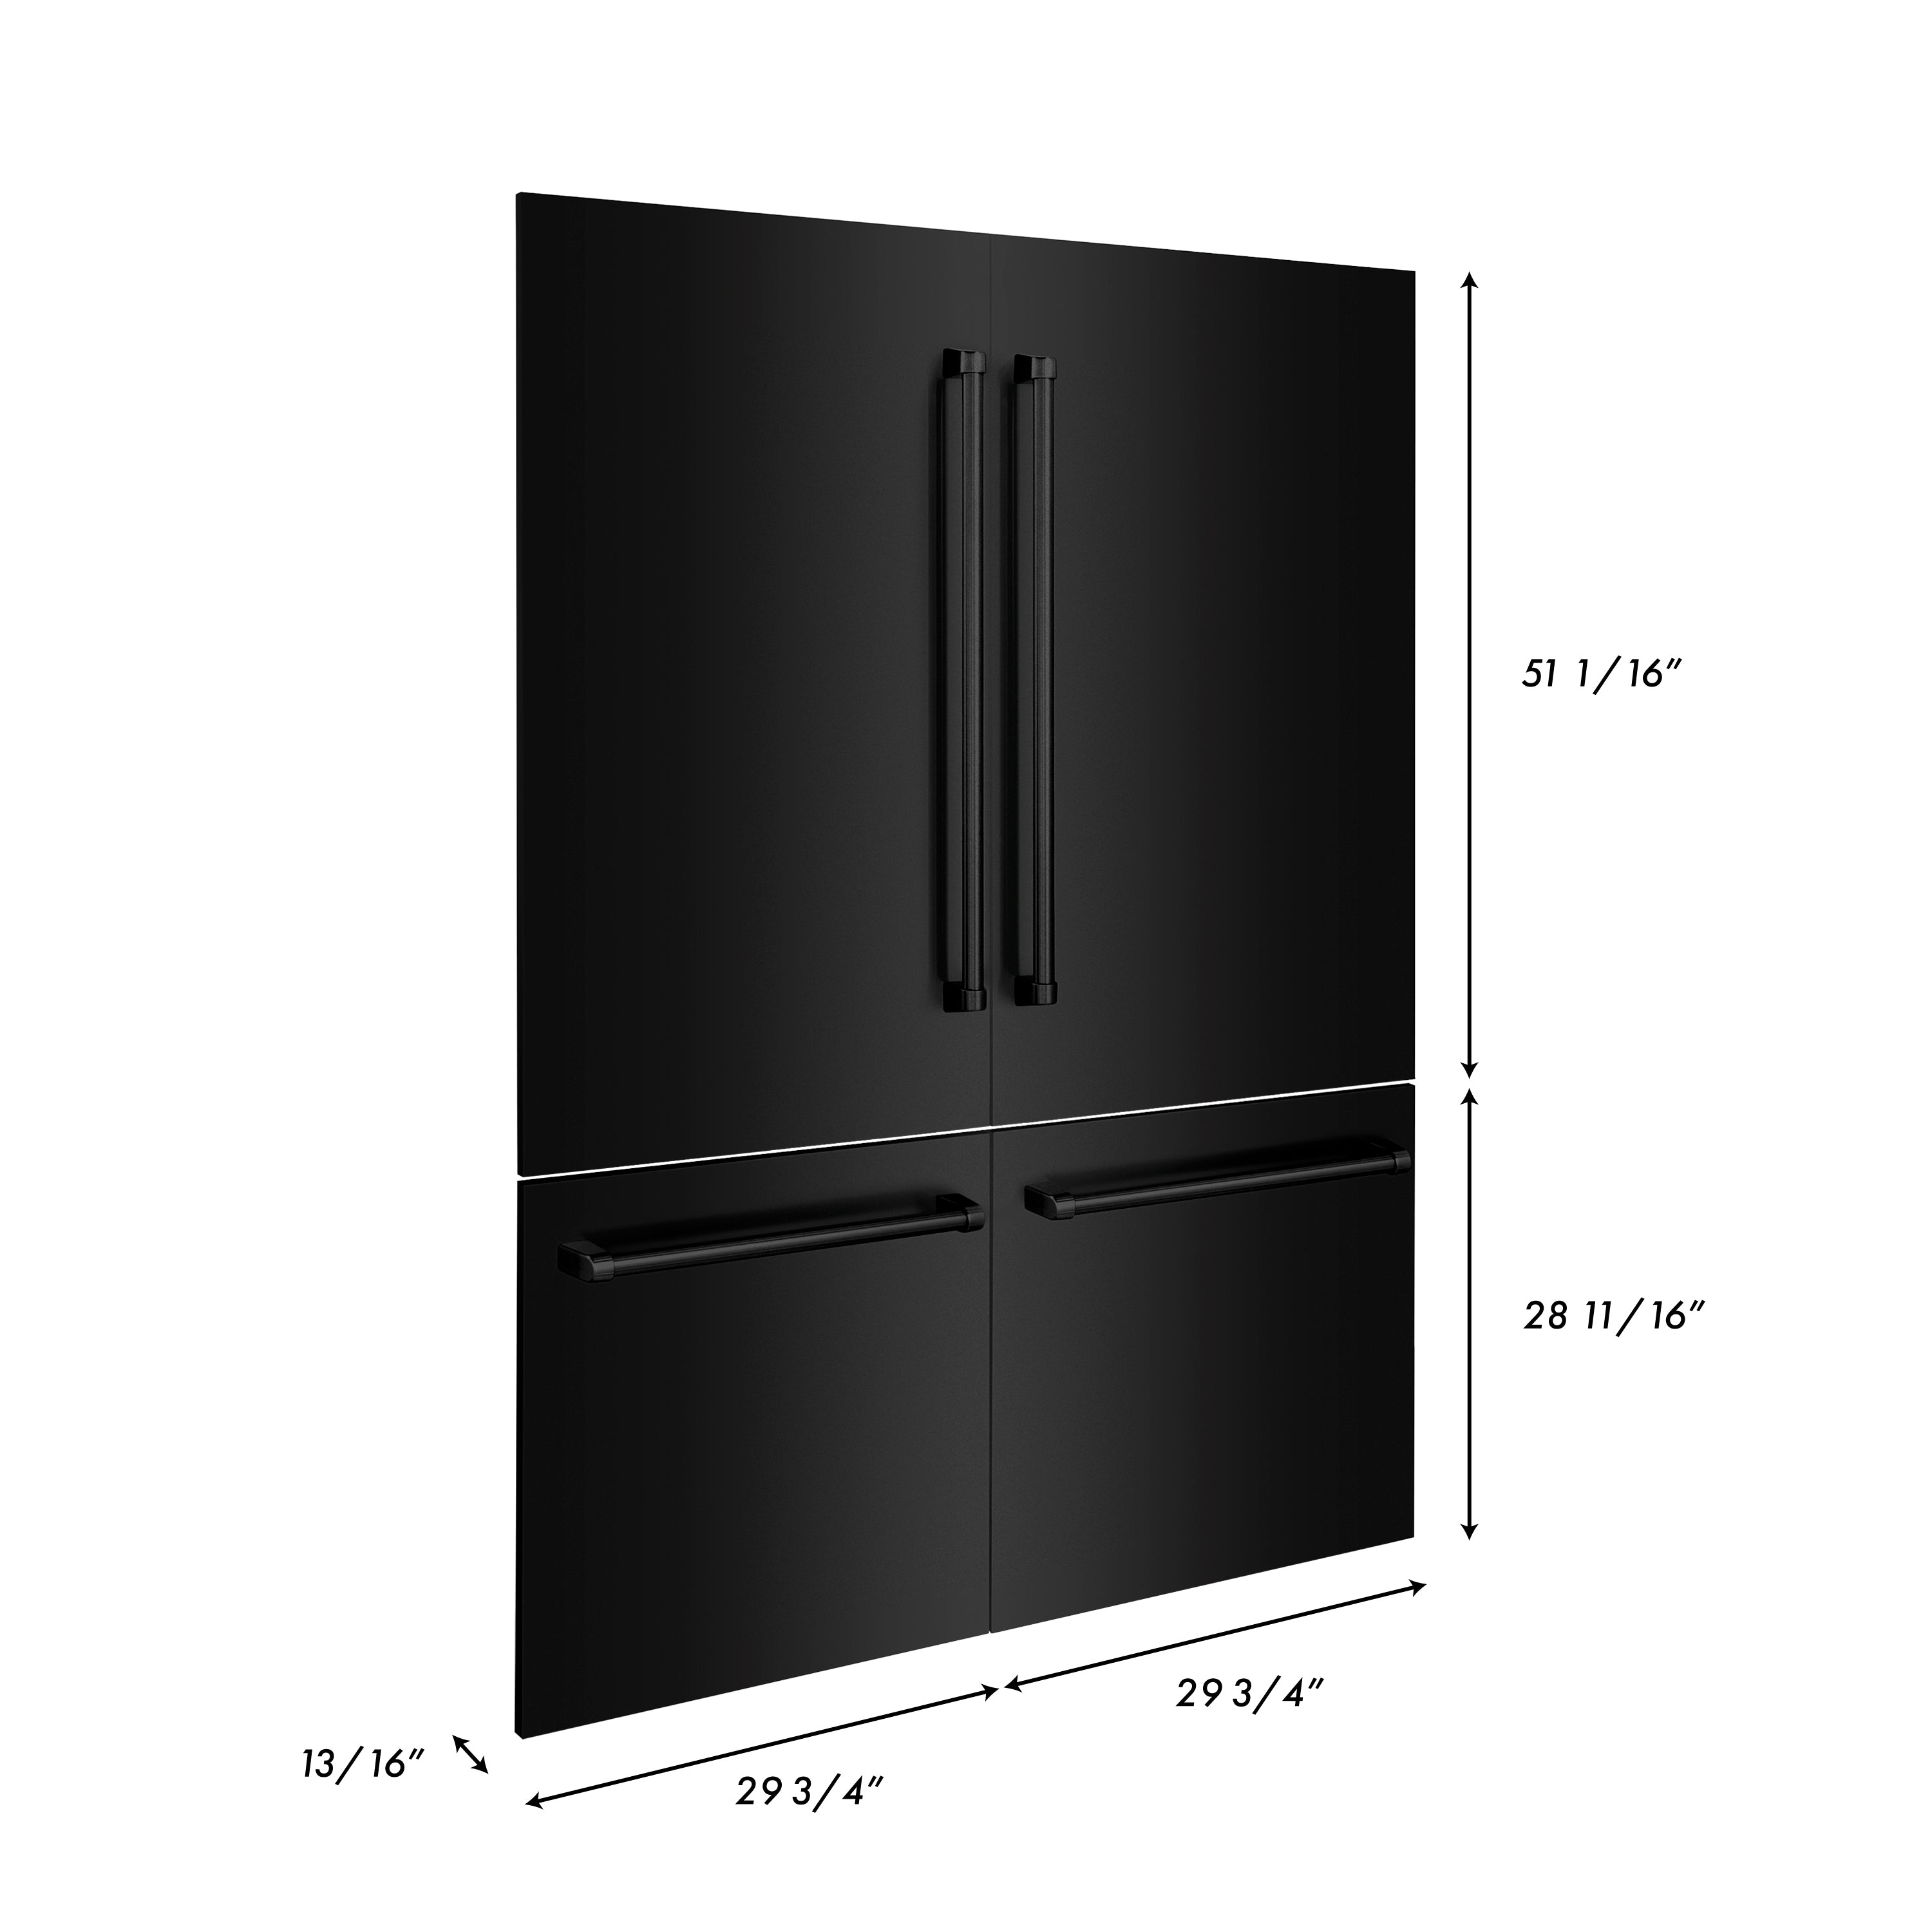 ZLINE 60" Refrigerator Panels in Black Stainless Steel for a 60" Buit-in Refrigerator (RPBIV-BS-60)